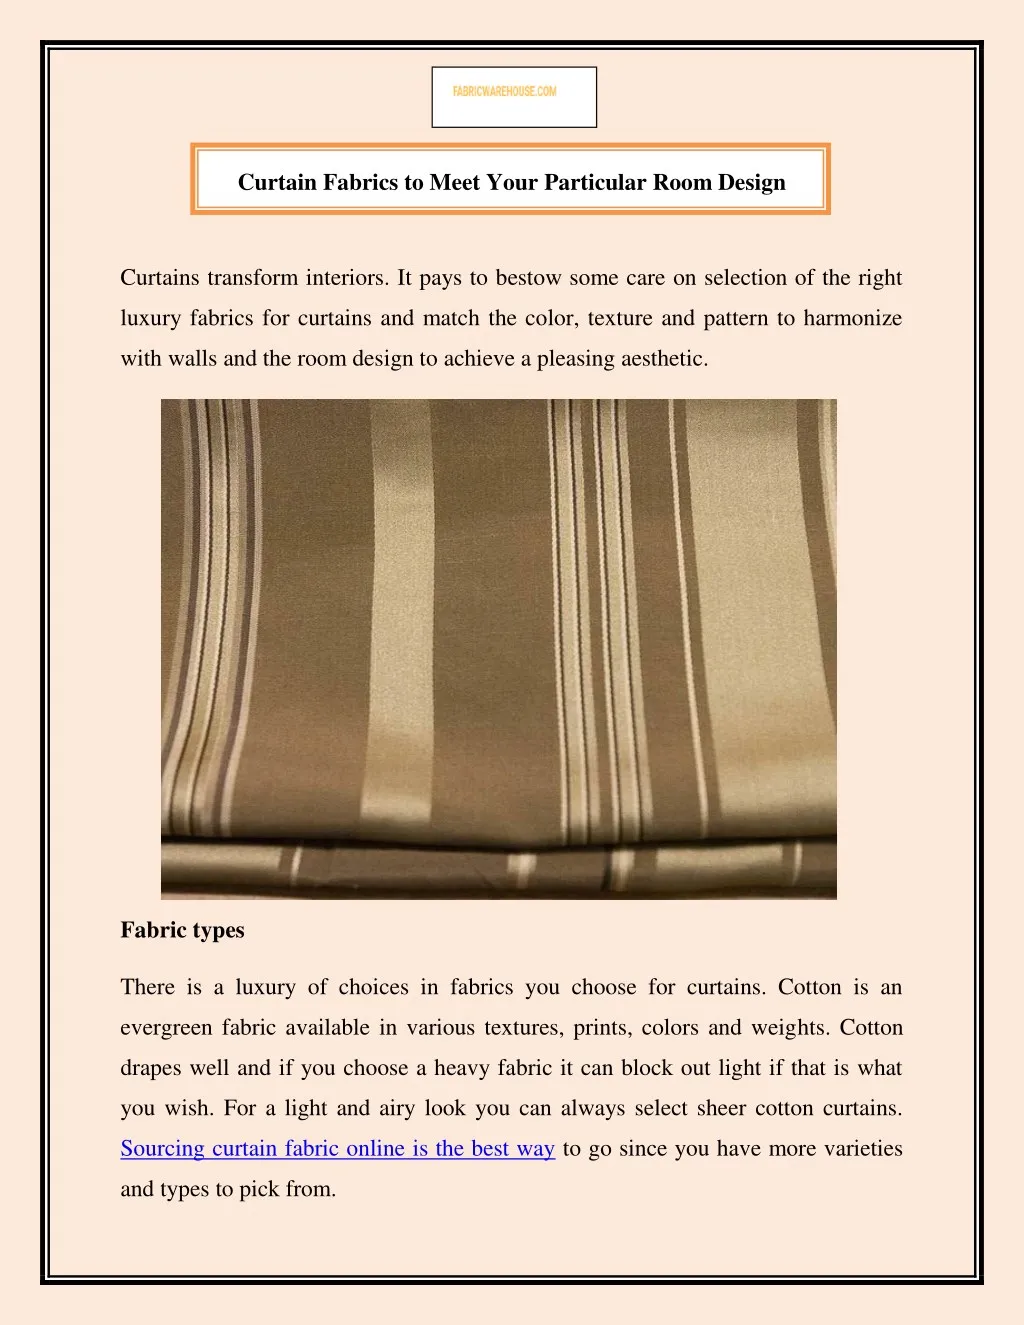 curtain fabrics to meet your particular room